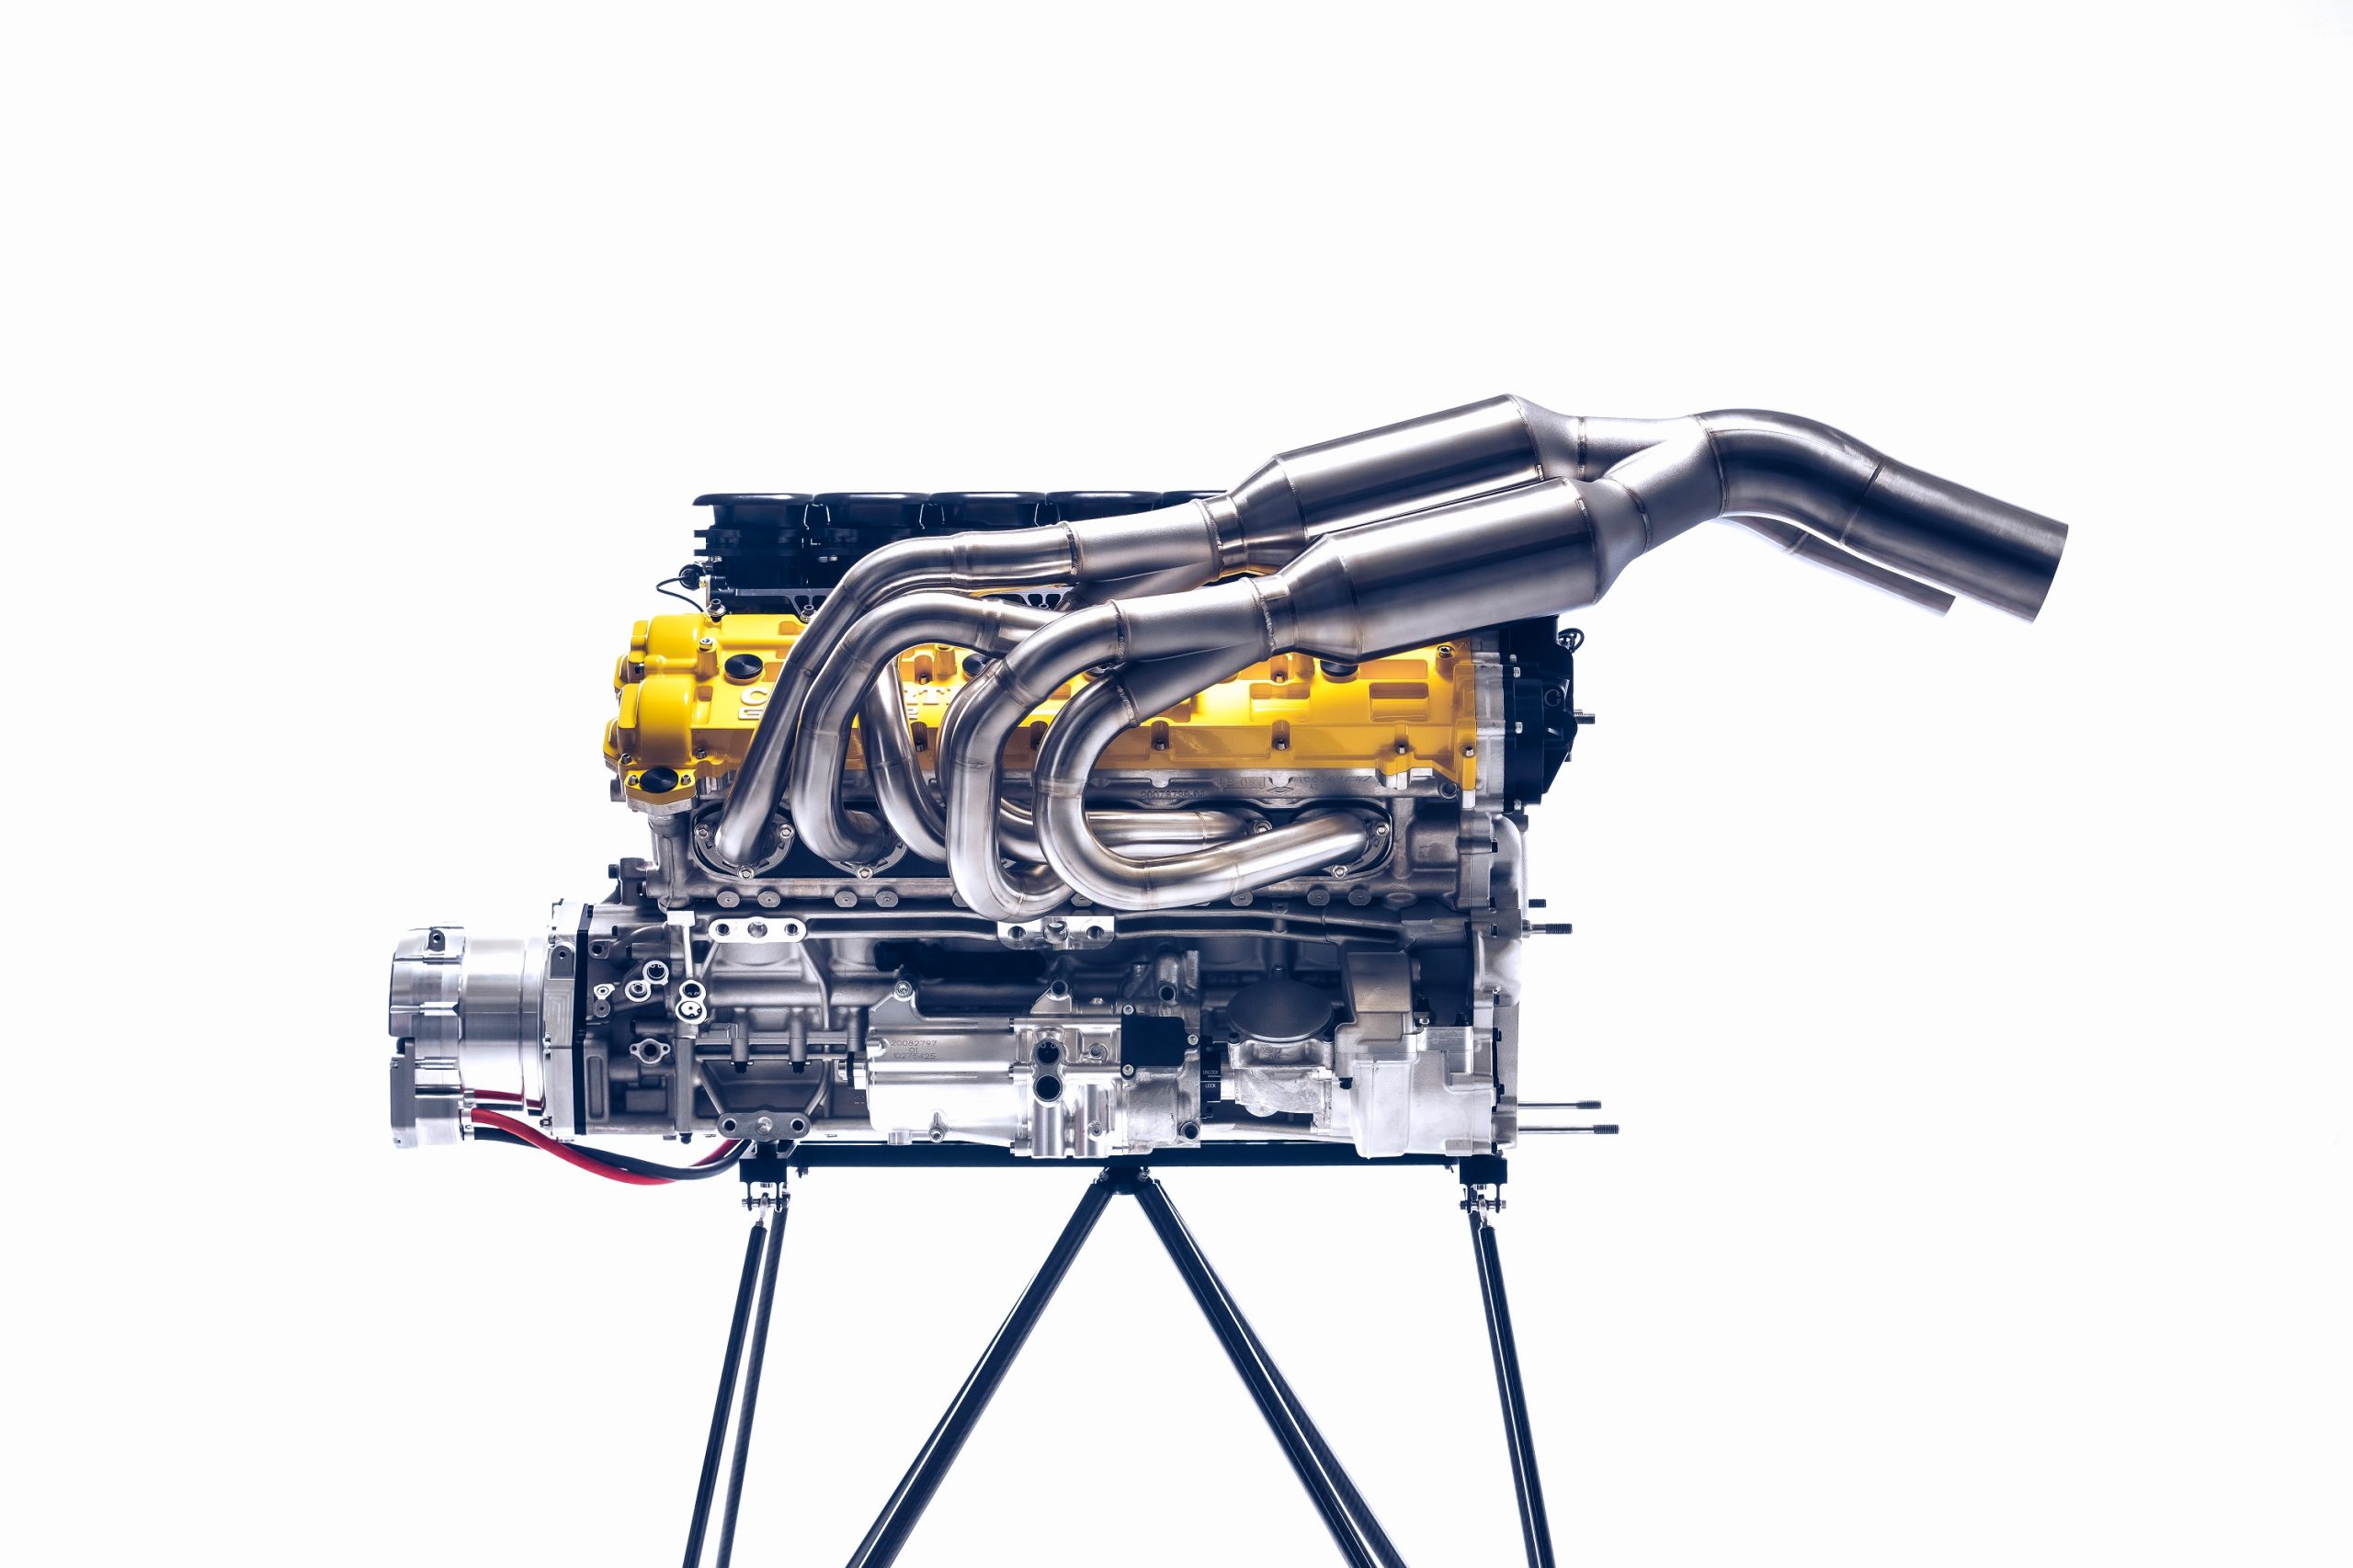 The GMA T.33's V12 engine on a stand against a white background